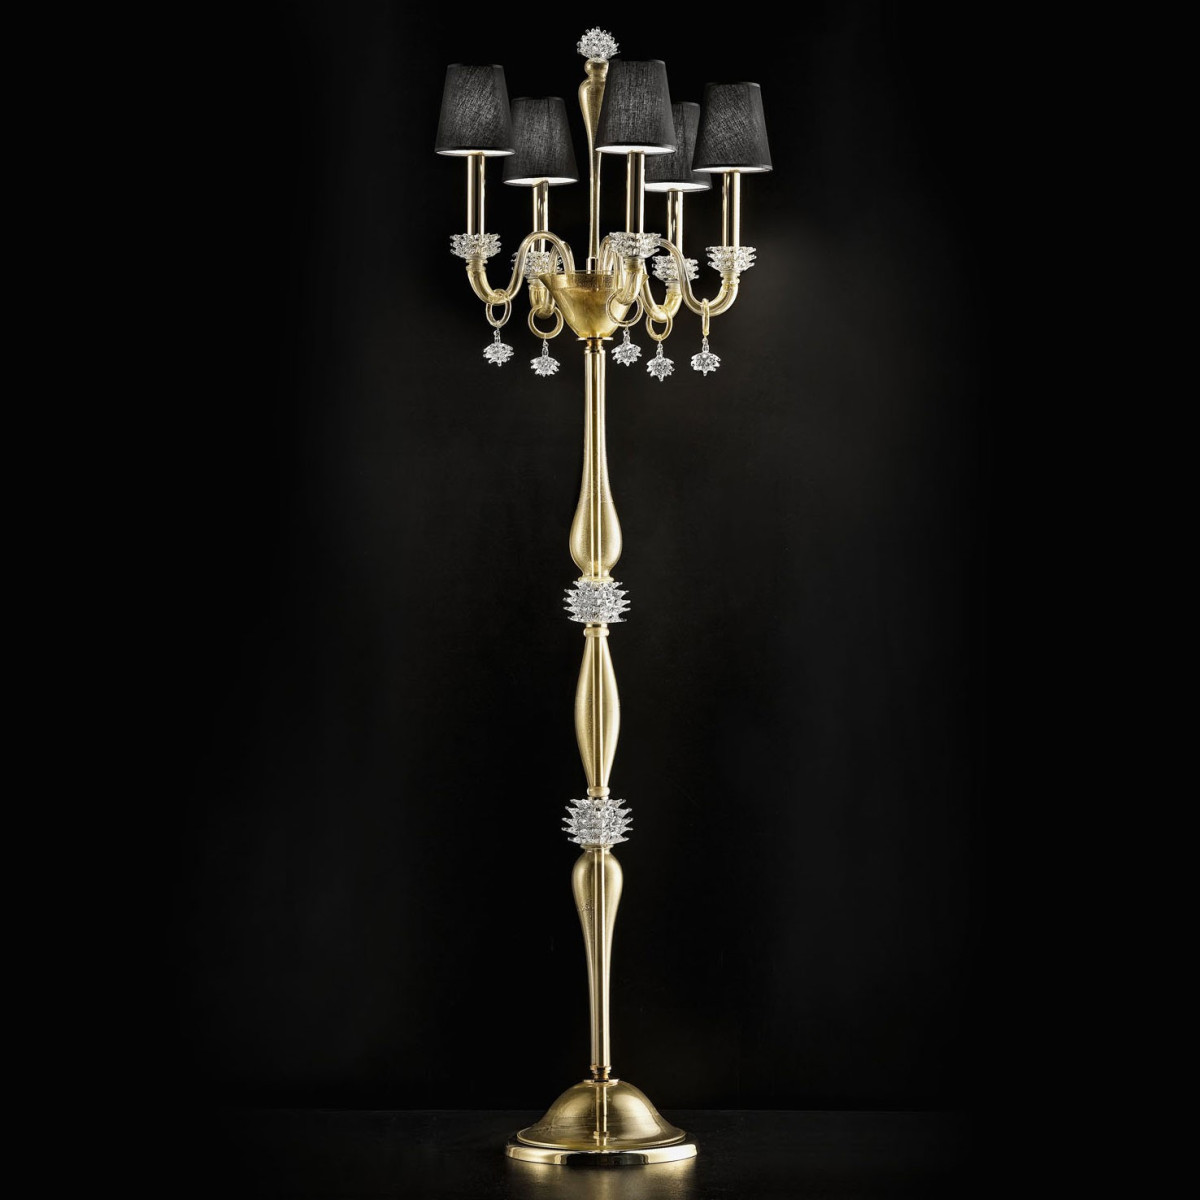 "Sibilla" Murano glass floor lamp - 5 lights - gold with black lampshades